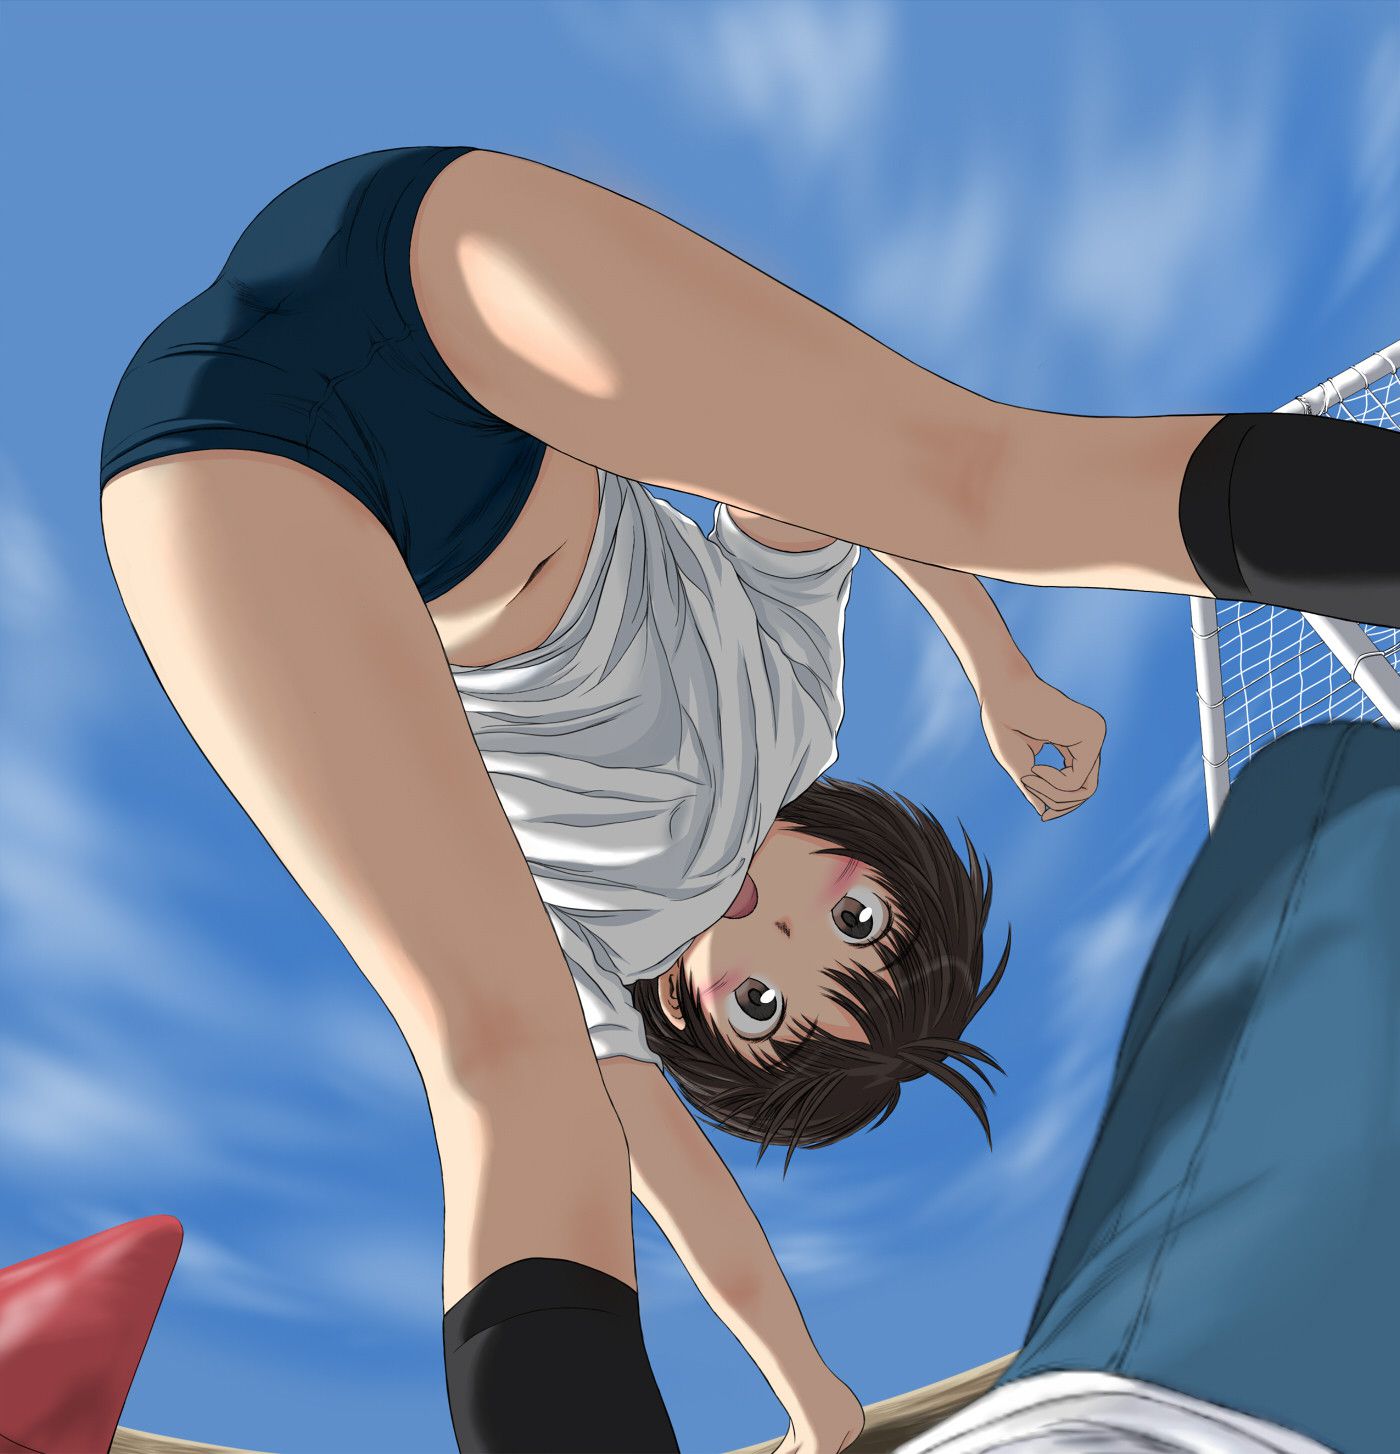 Secondary erotic image of a girl looking up at low angle 9